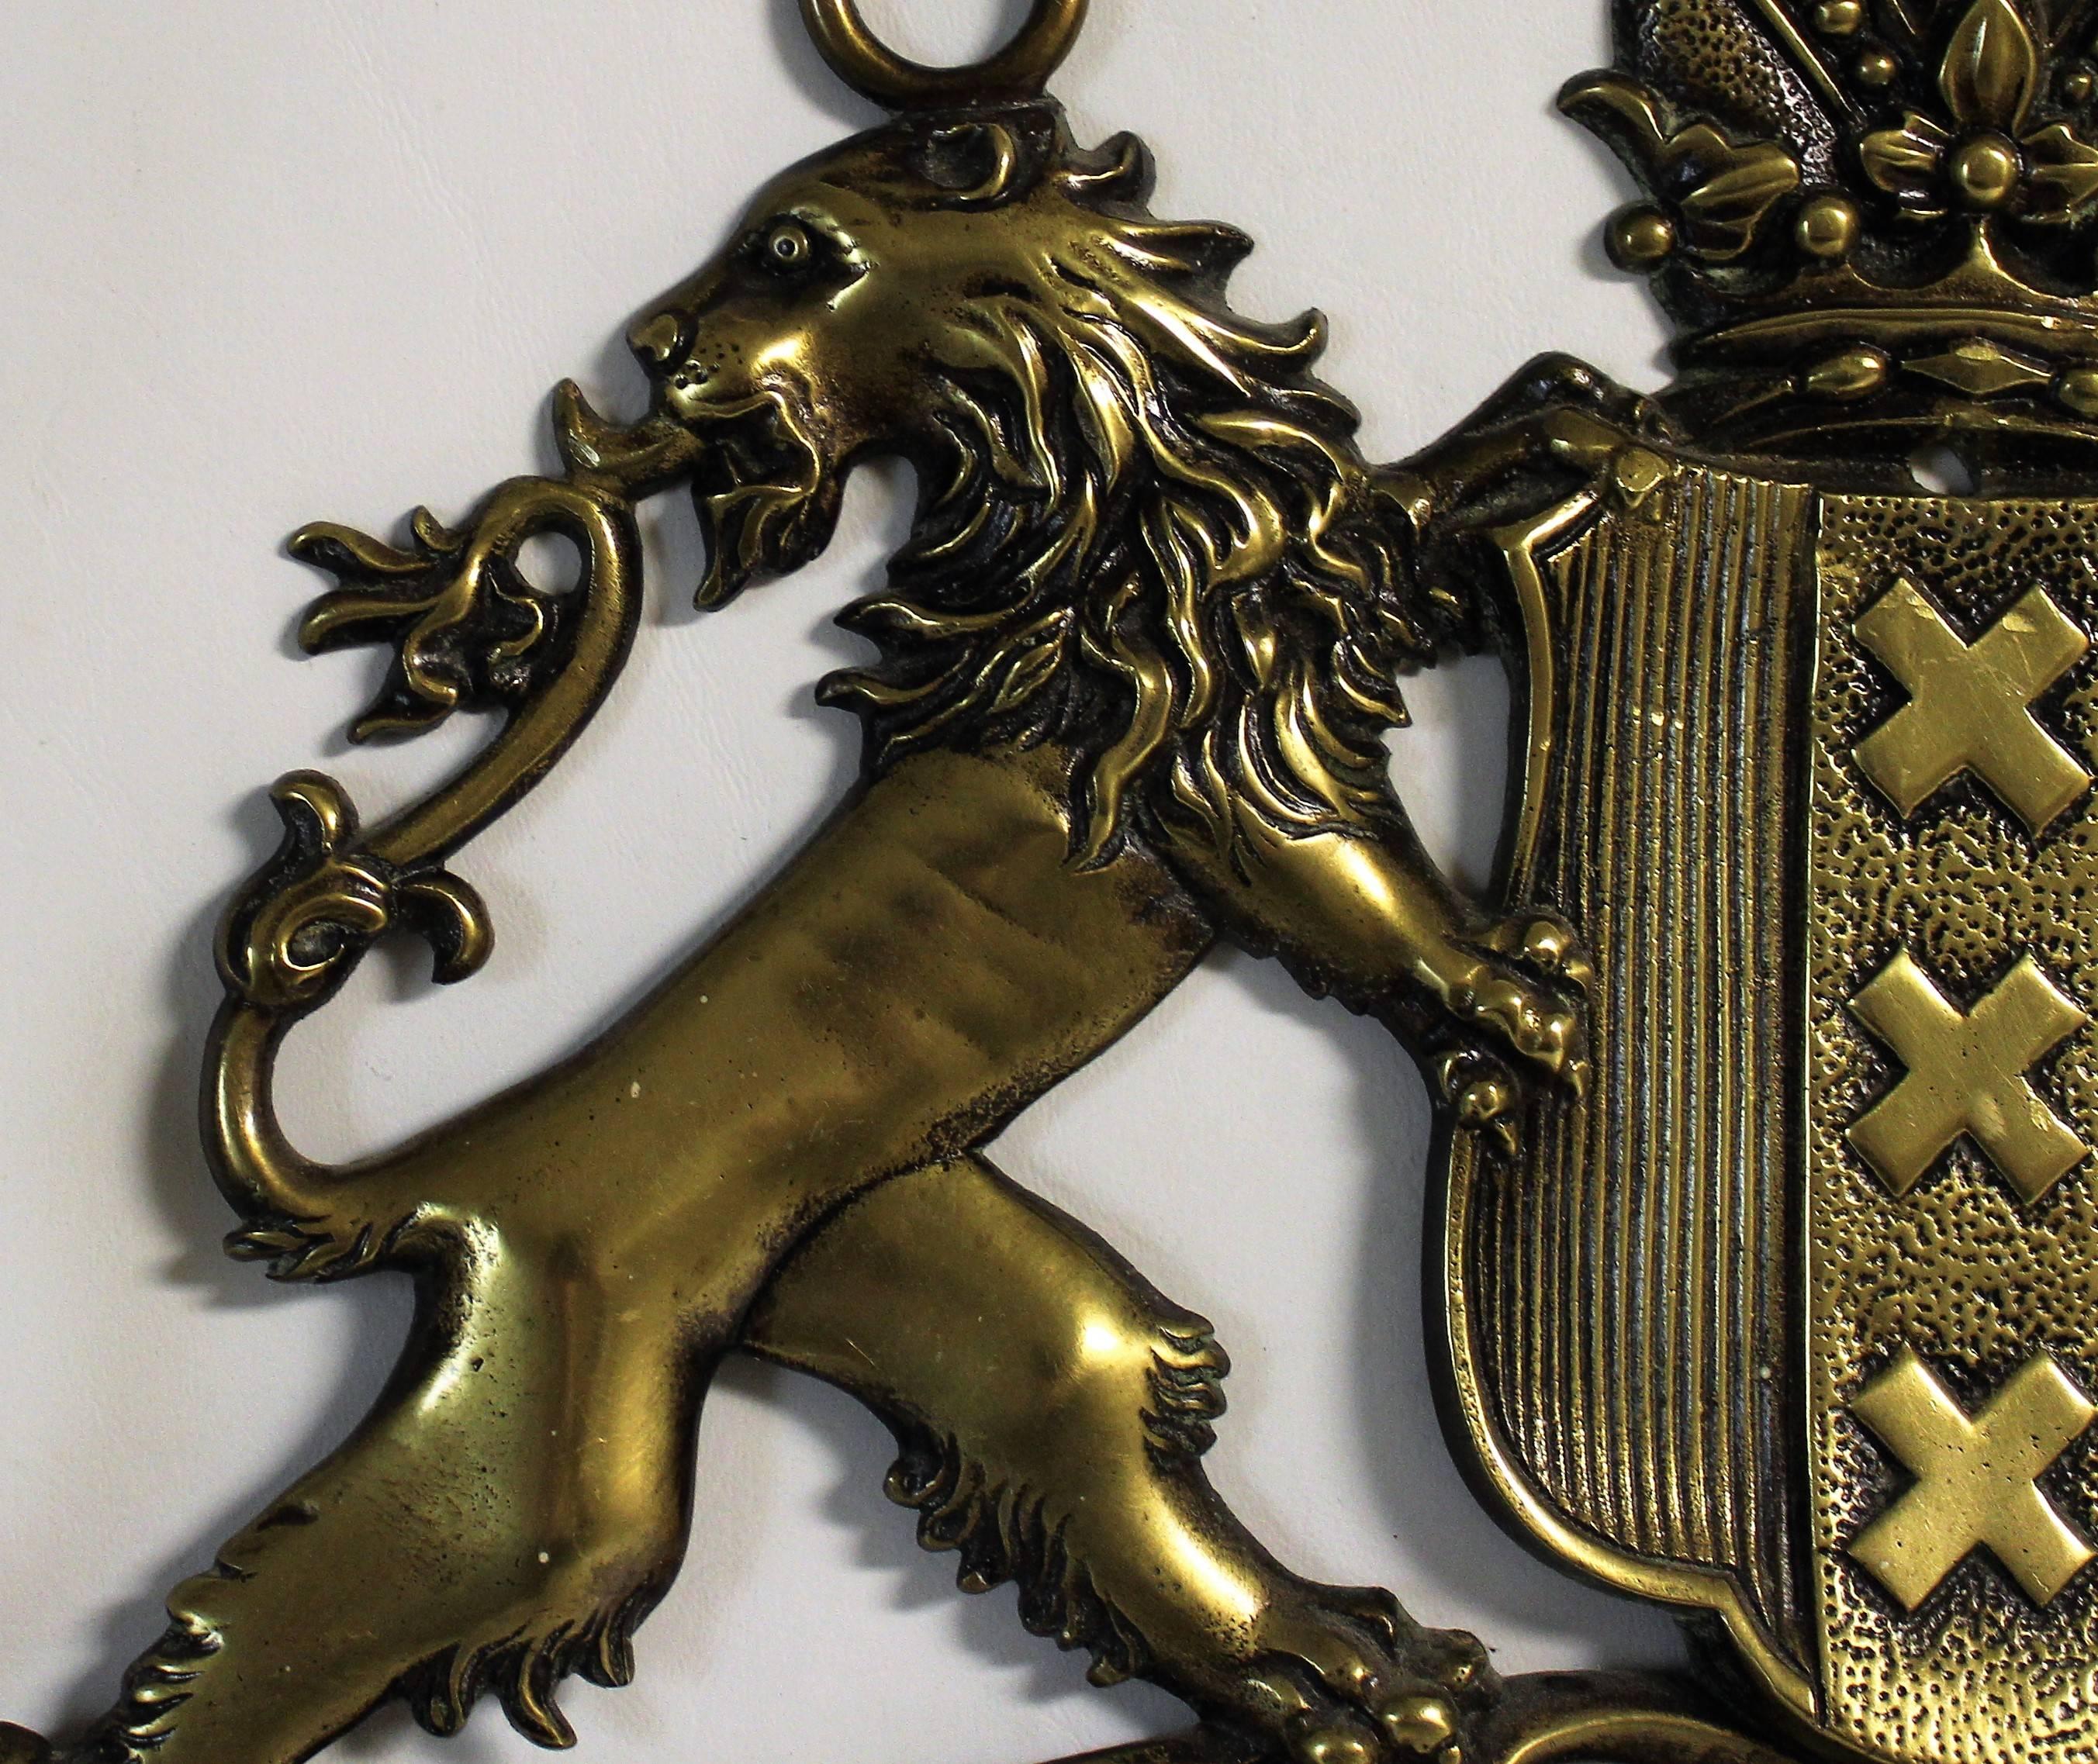 Early 20th century coat of arms brass coat hanger.